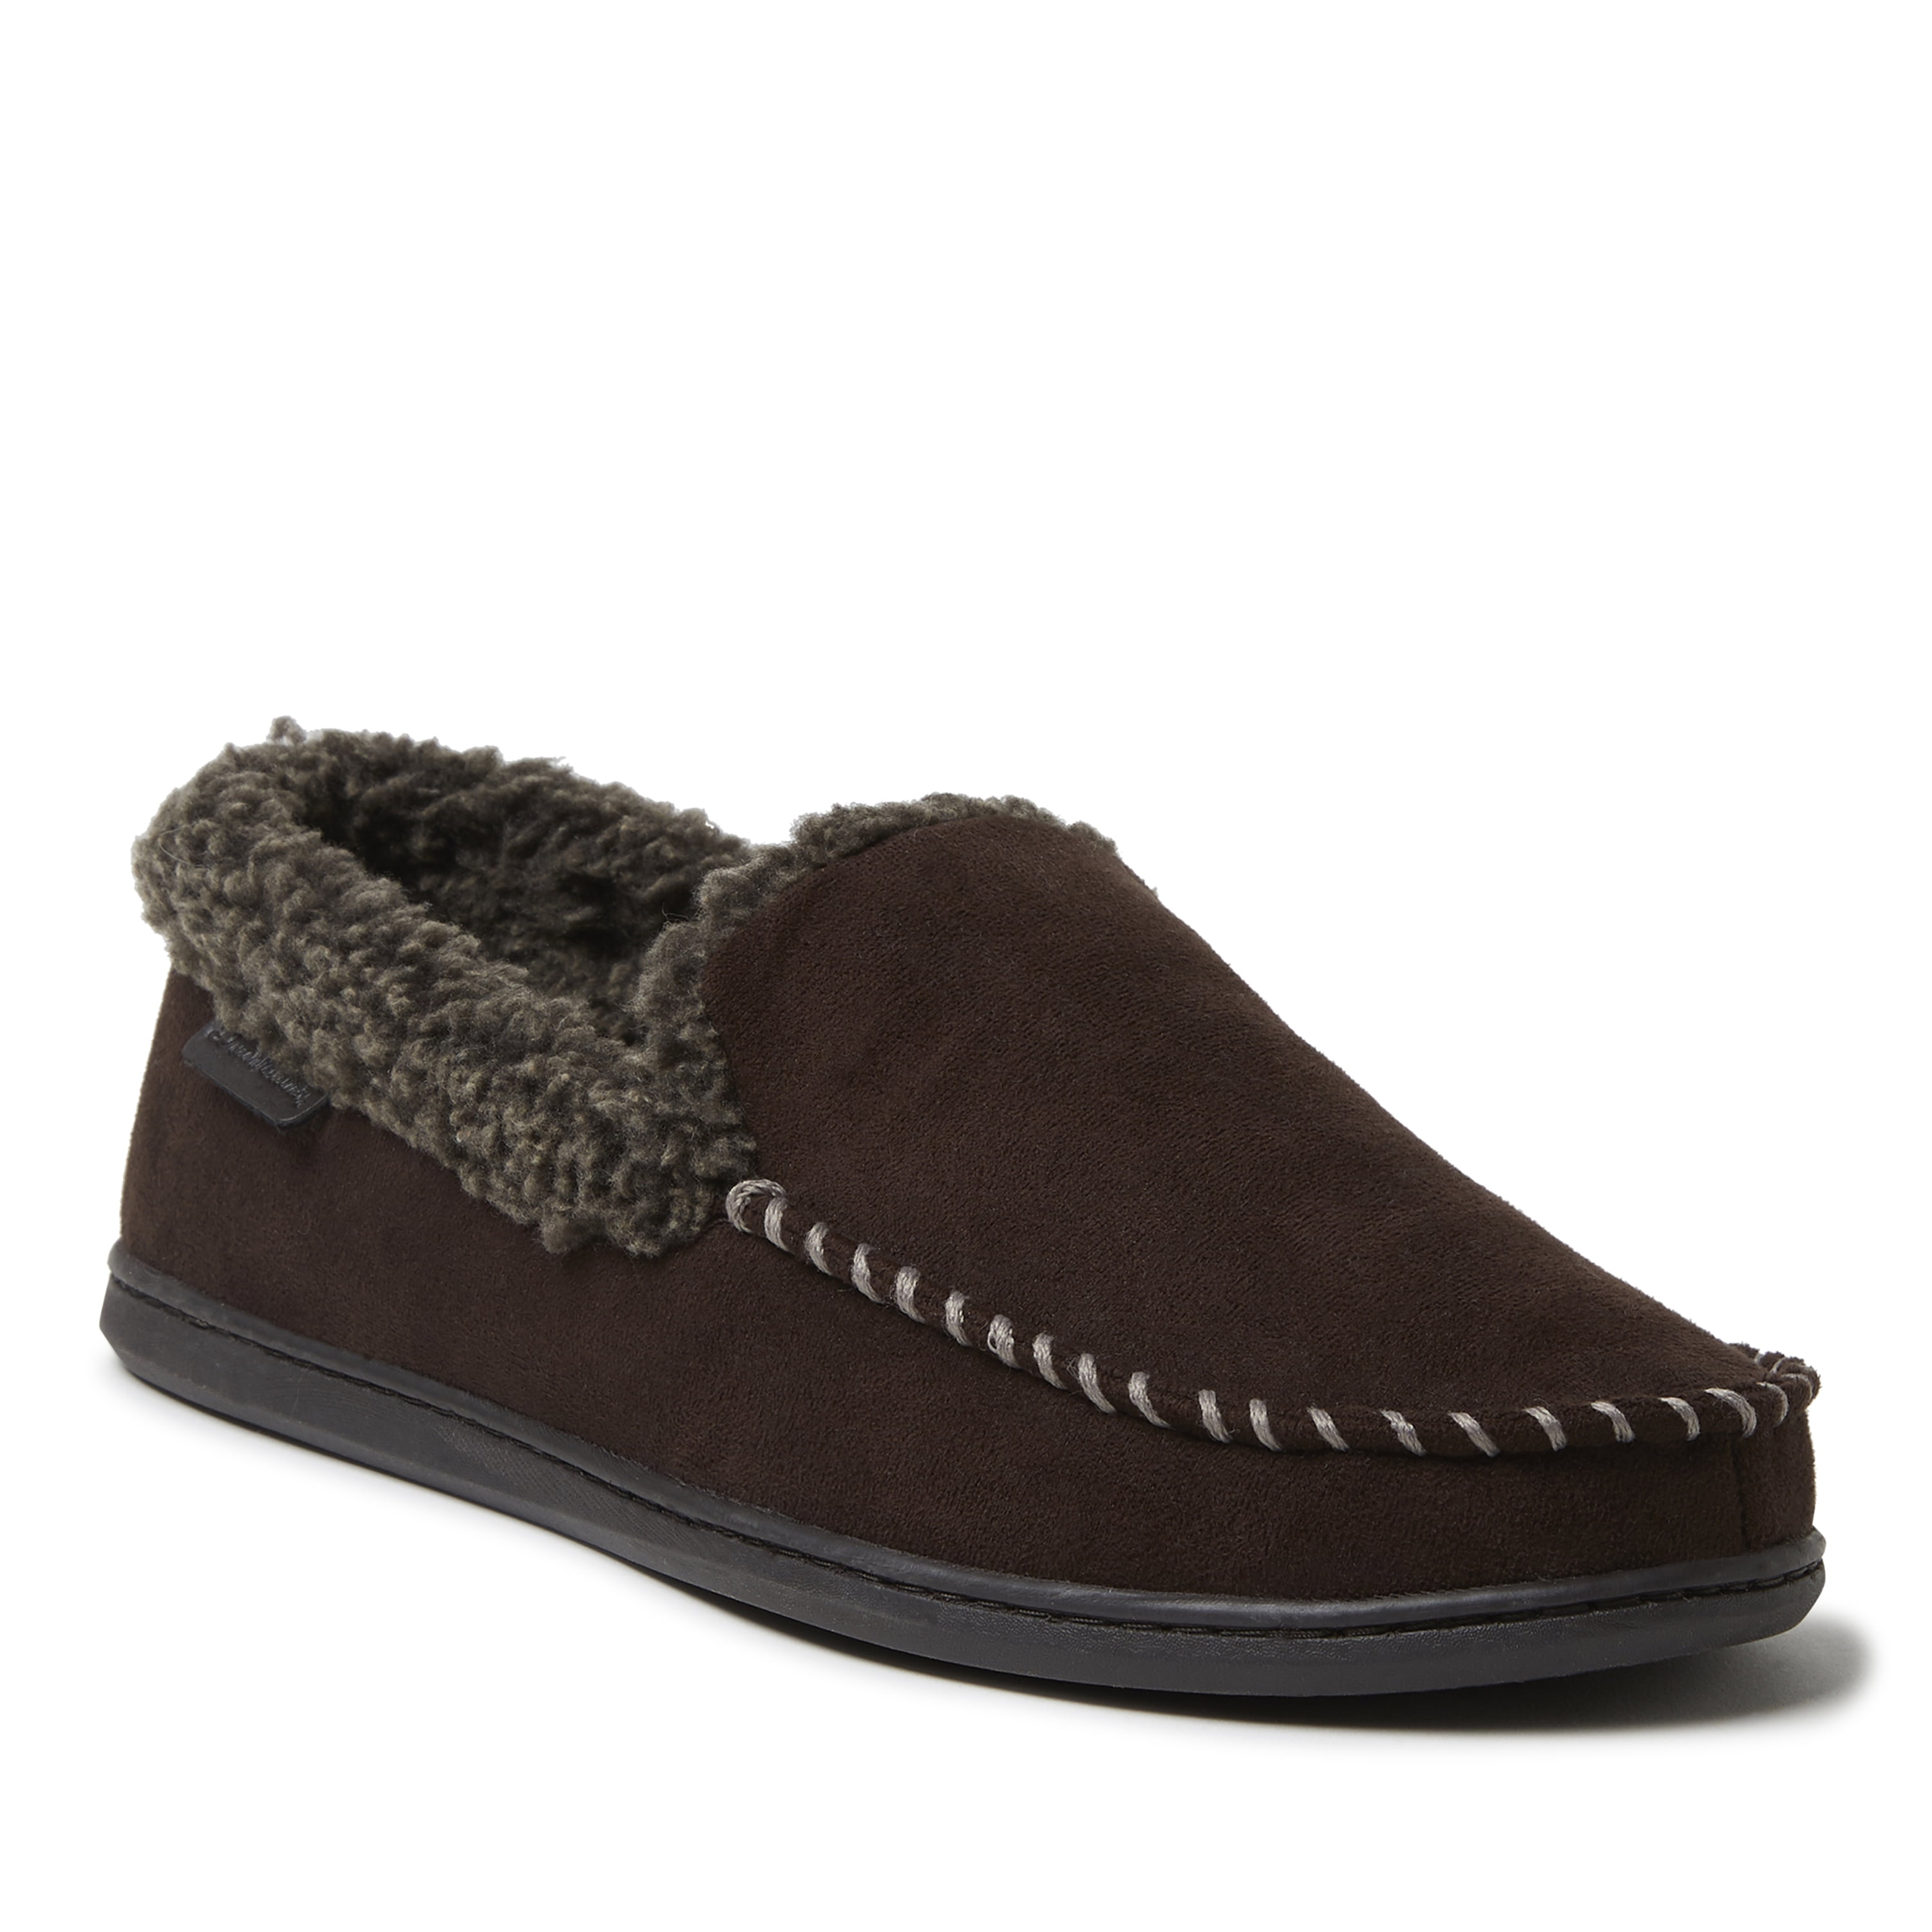 Dearfoams Mens Moccasin with Whipstitch Slipper 